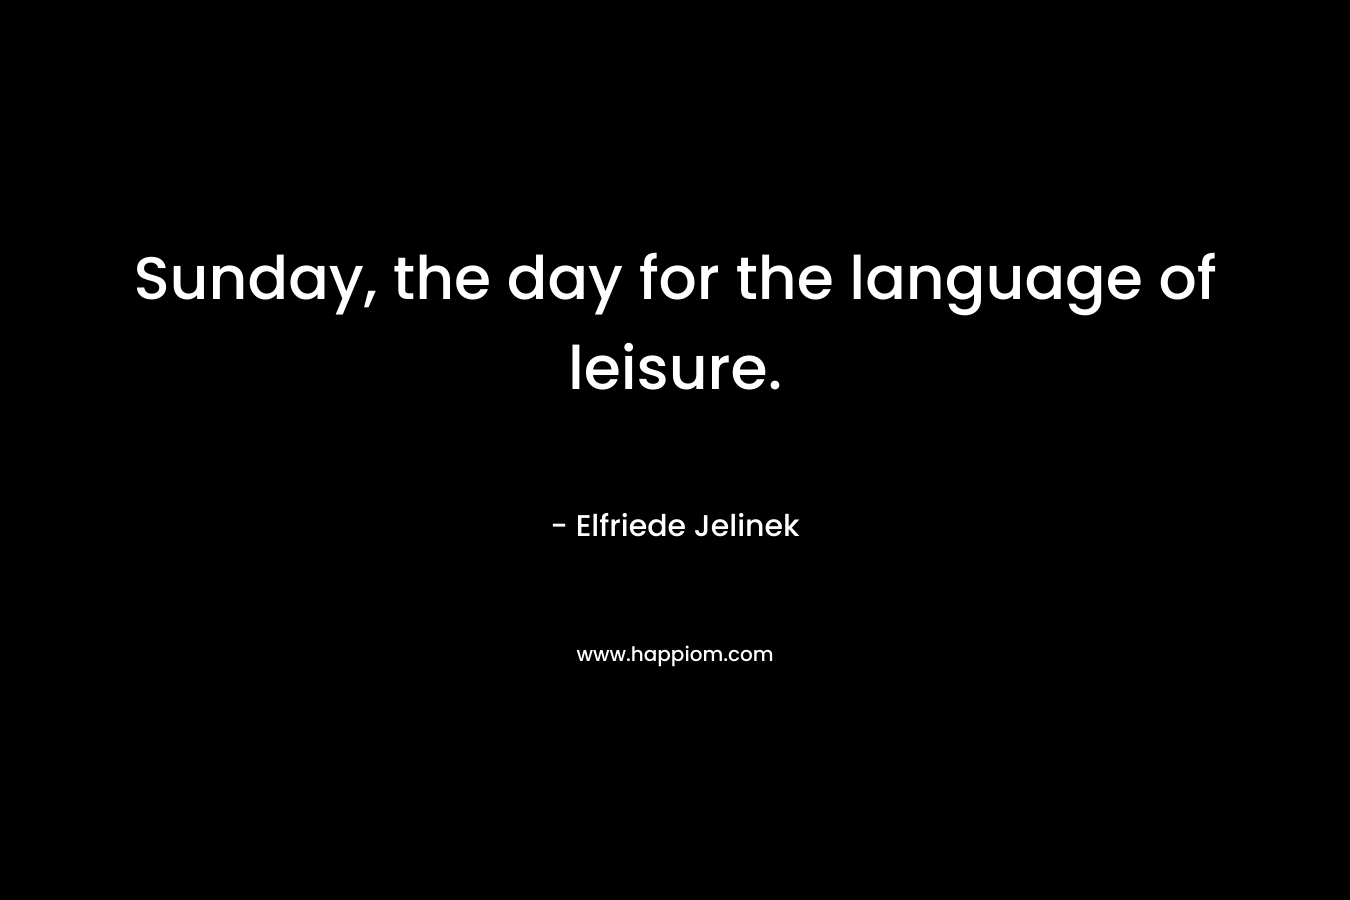 Sunday, the day for the language of leisure. – Elfriede Jelinek